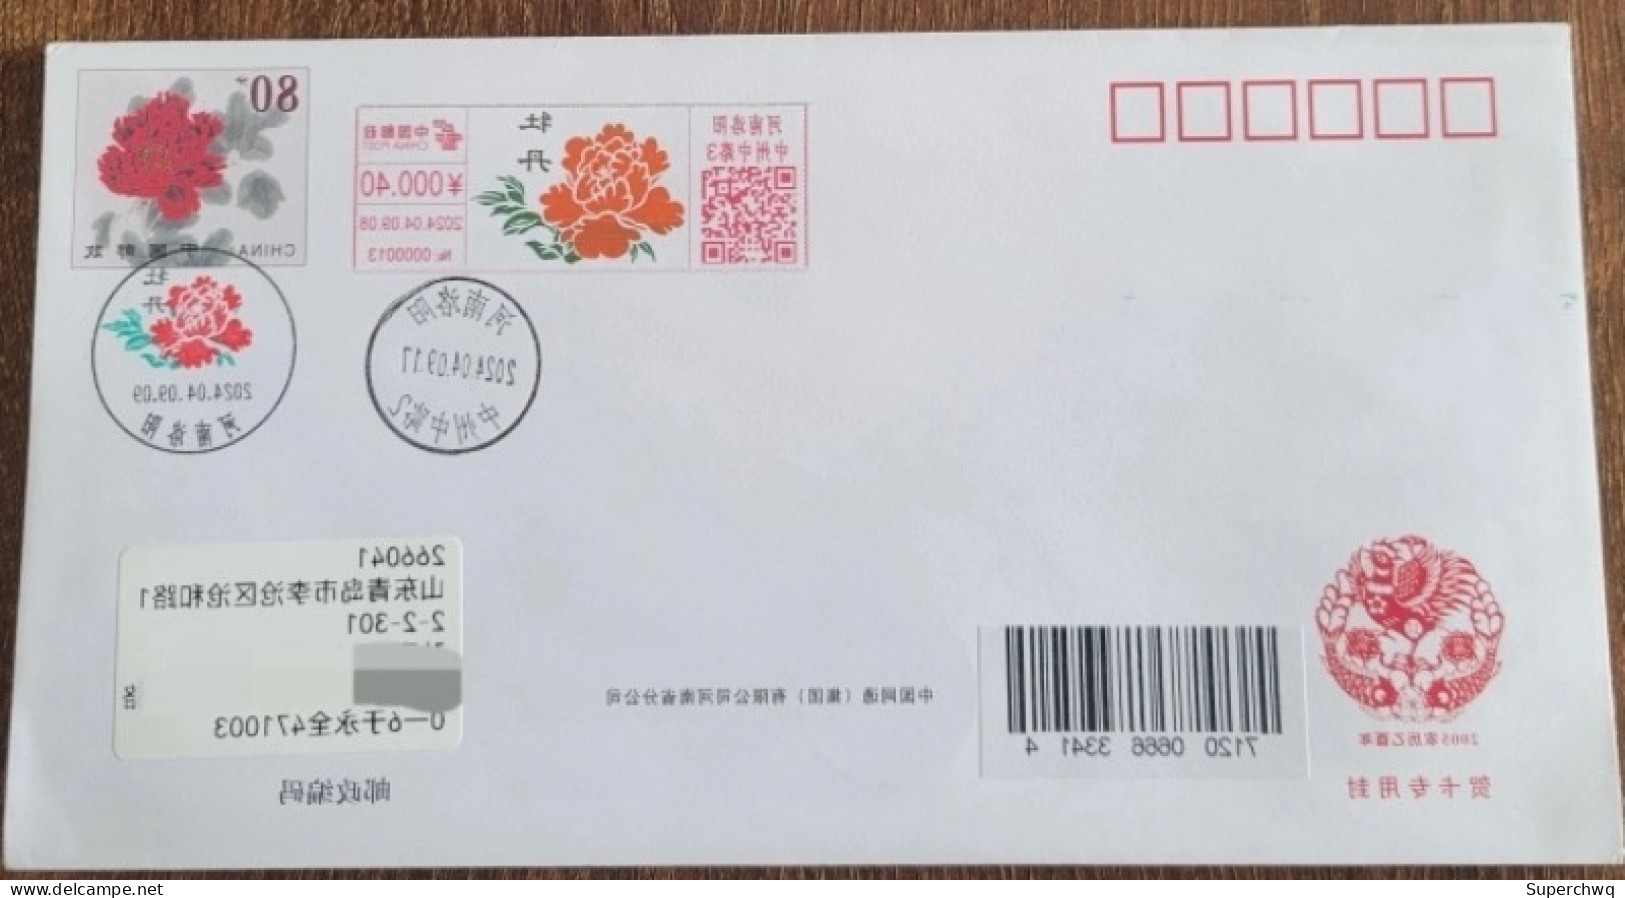 China Cover "Peony" (Luoyang, Henan) Colored Postage Stamp With The Same Theme, First Day Actual Postage Cover - Omslagen